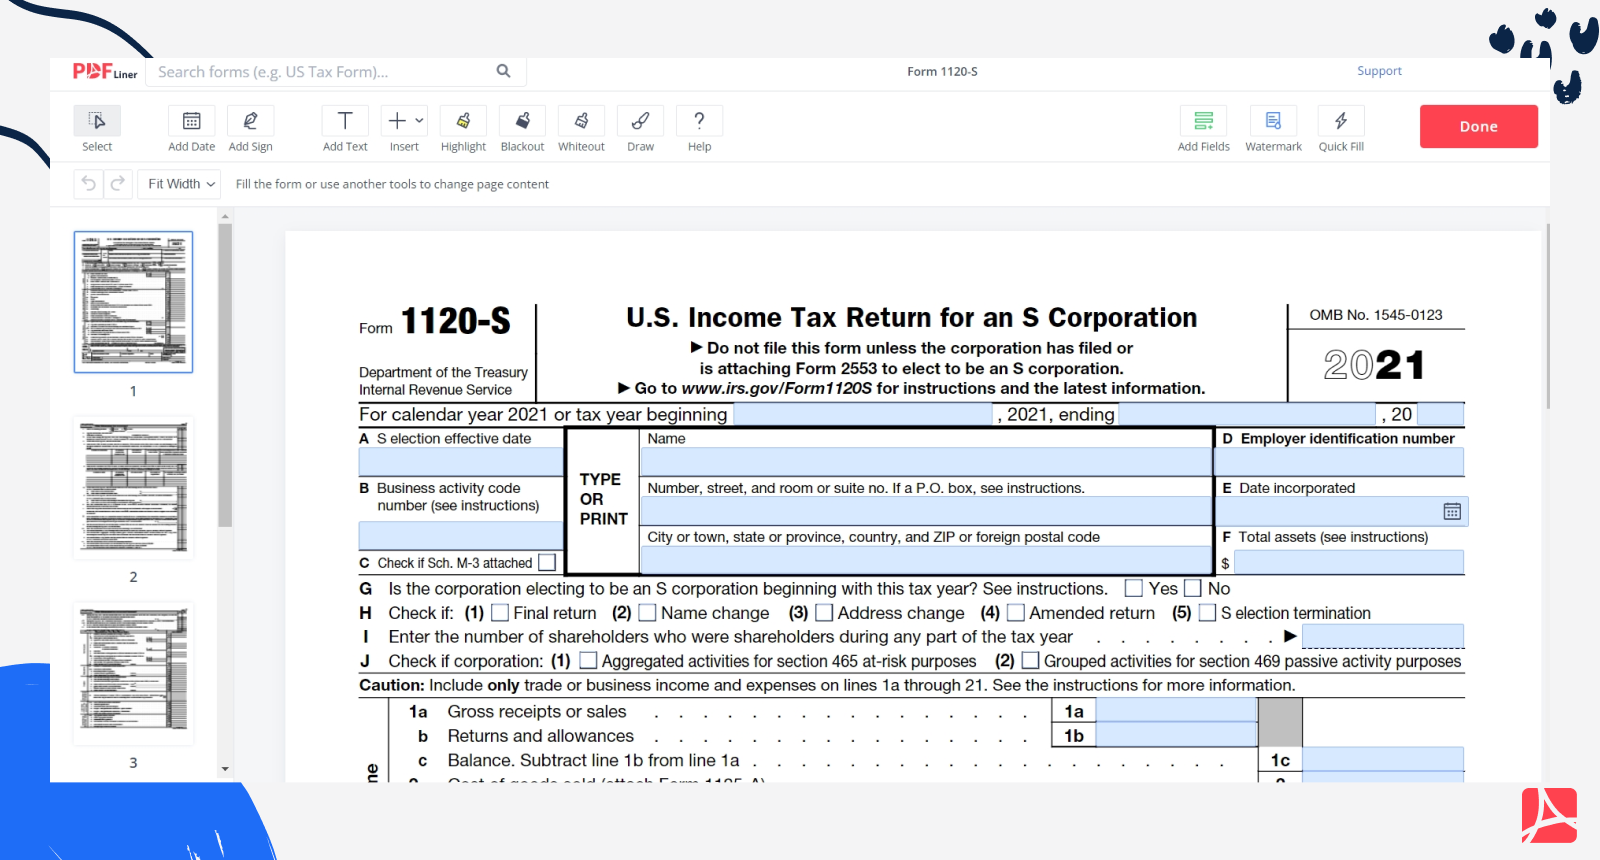 Form 1120-S first page in PDFLiner editor